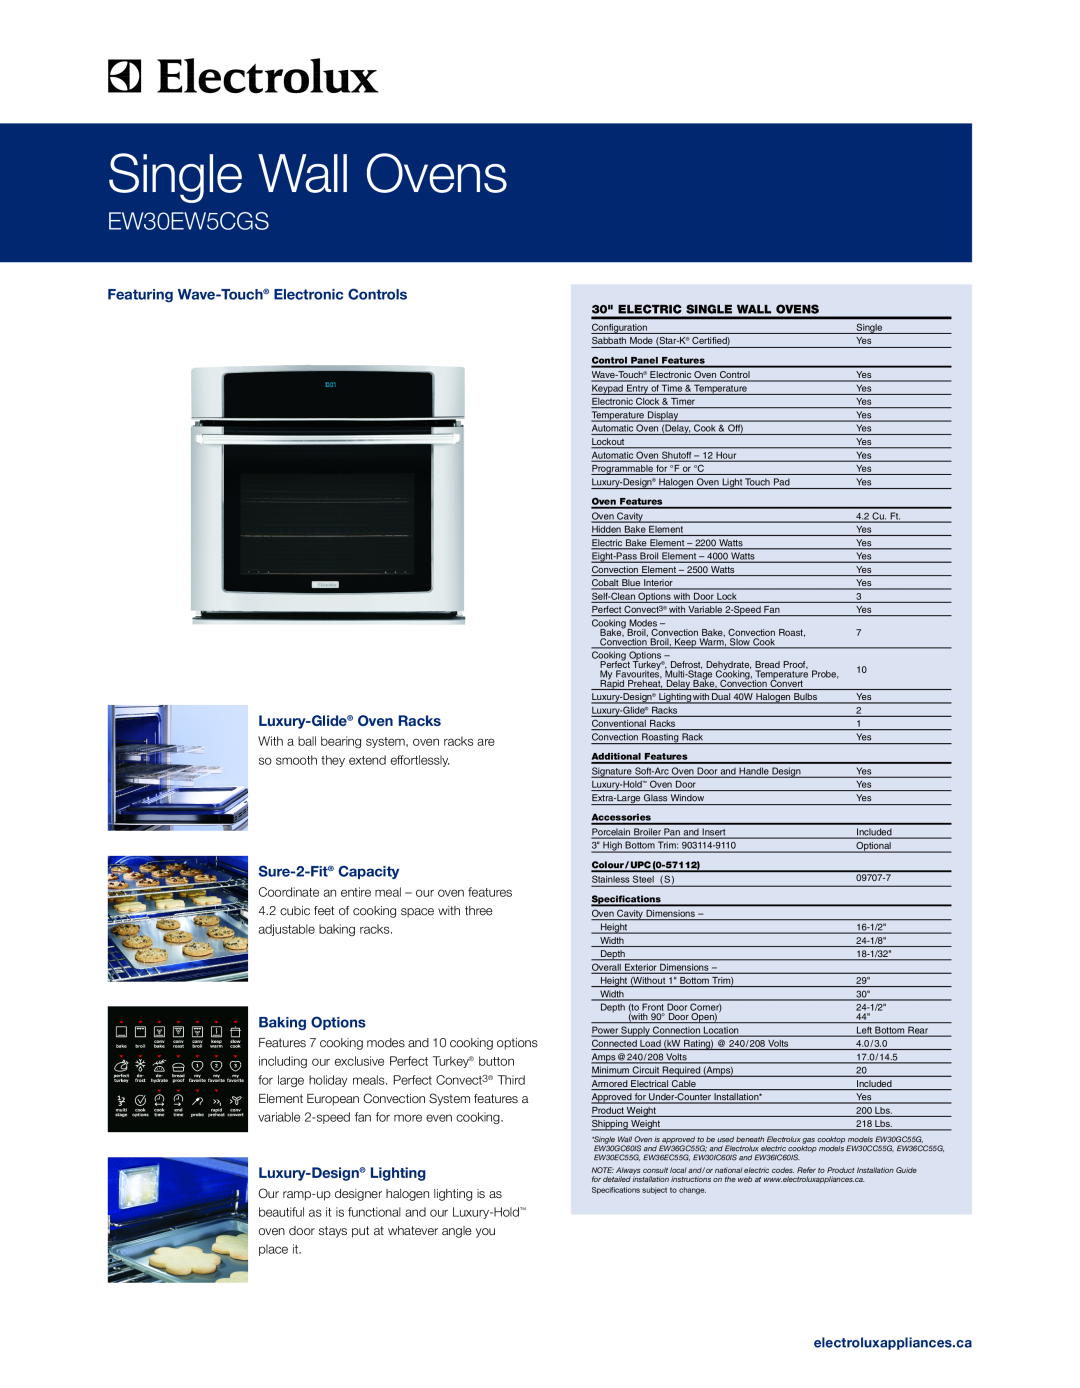 Electrolux EW30EW5CGS specifications Featuring Wave-Touch Electronic Controls Luxury-Glide Oven Racks, Sure-2-Fit Capacity 